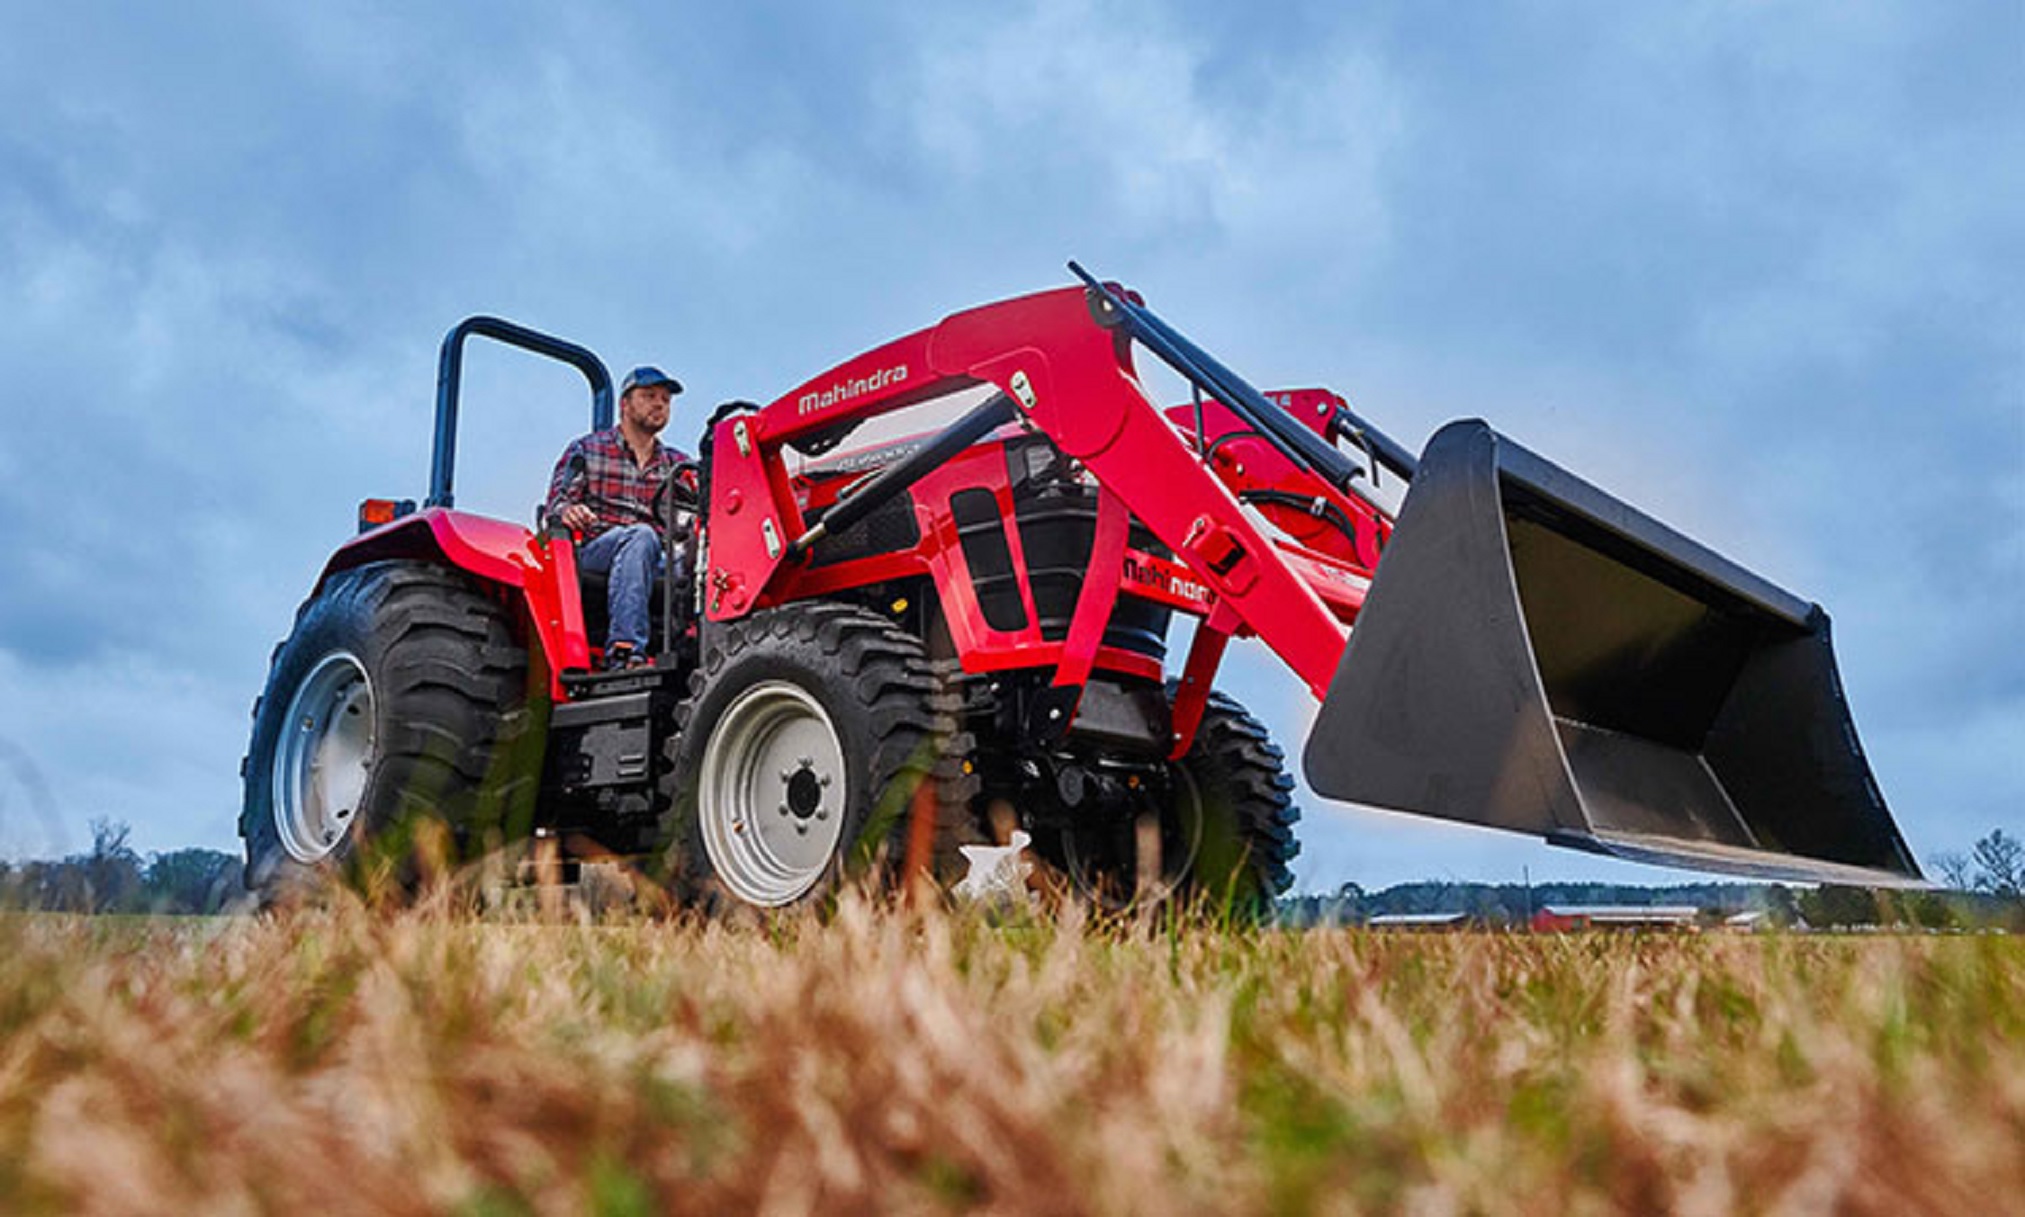 A farmer operates a red Mahindra 5100 Series utility tractor in a field